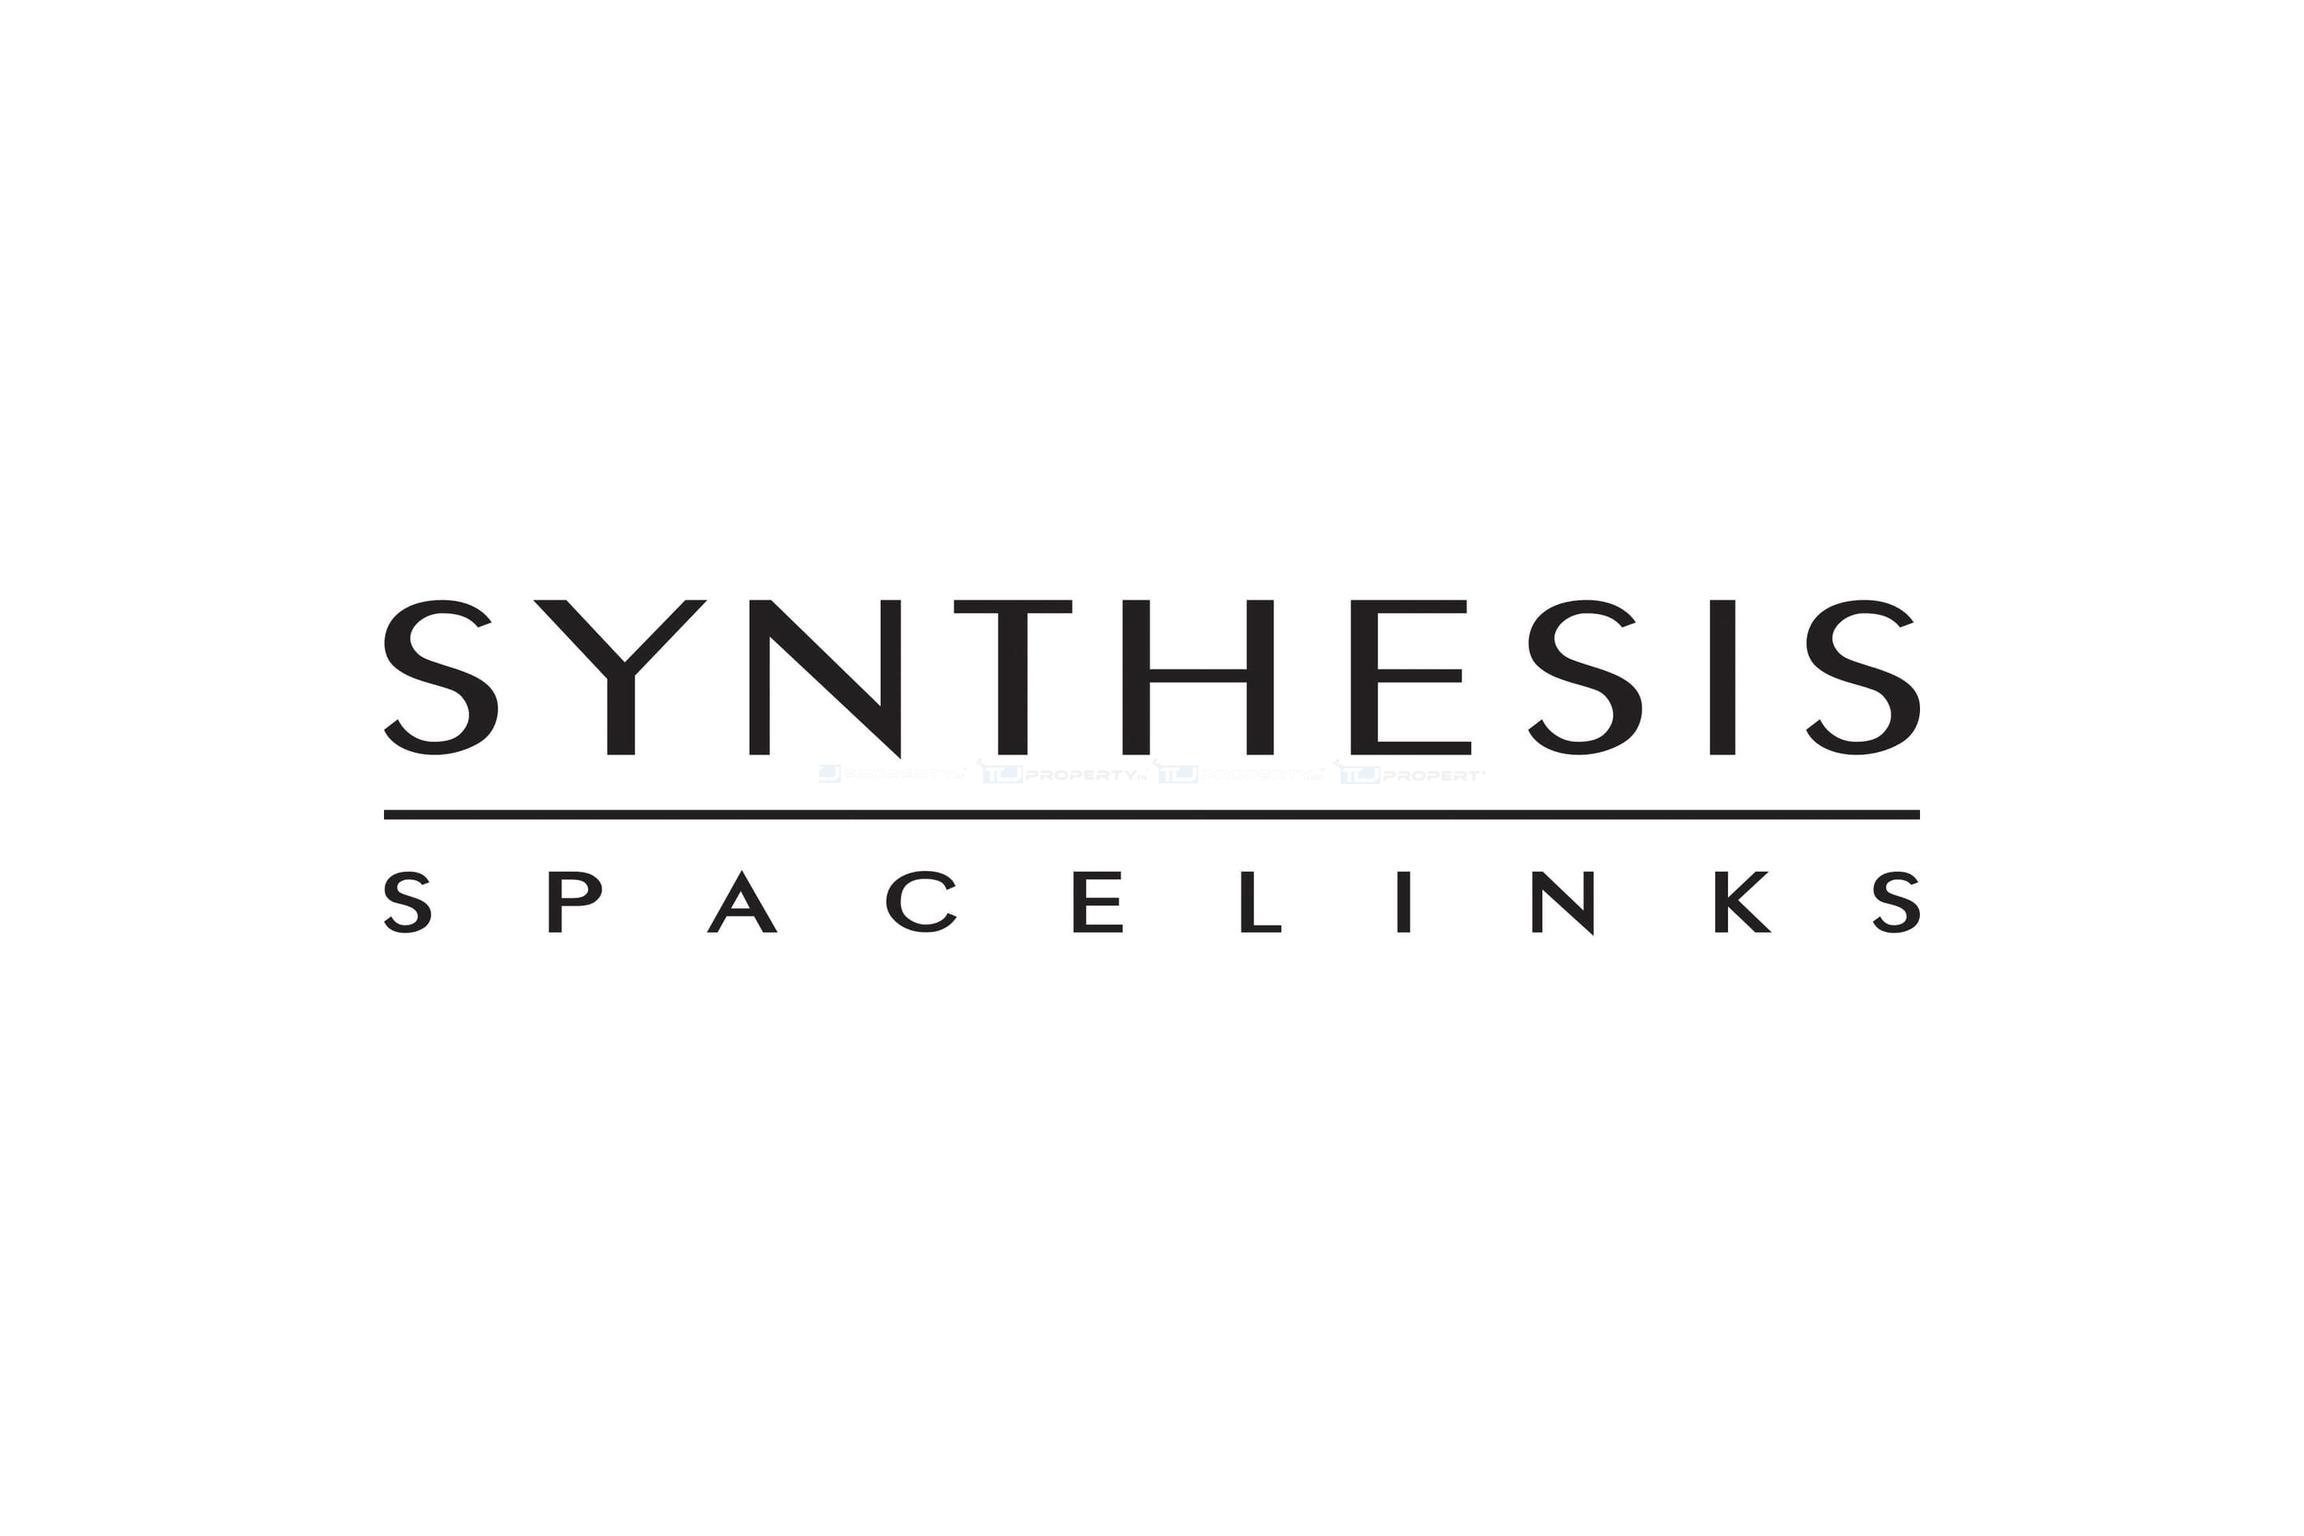  SYNTHESIS SPACELINKS